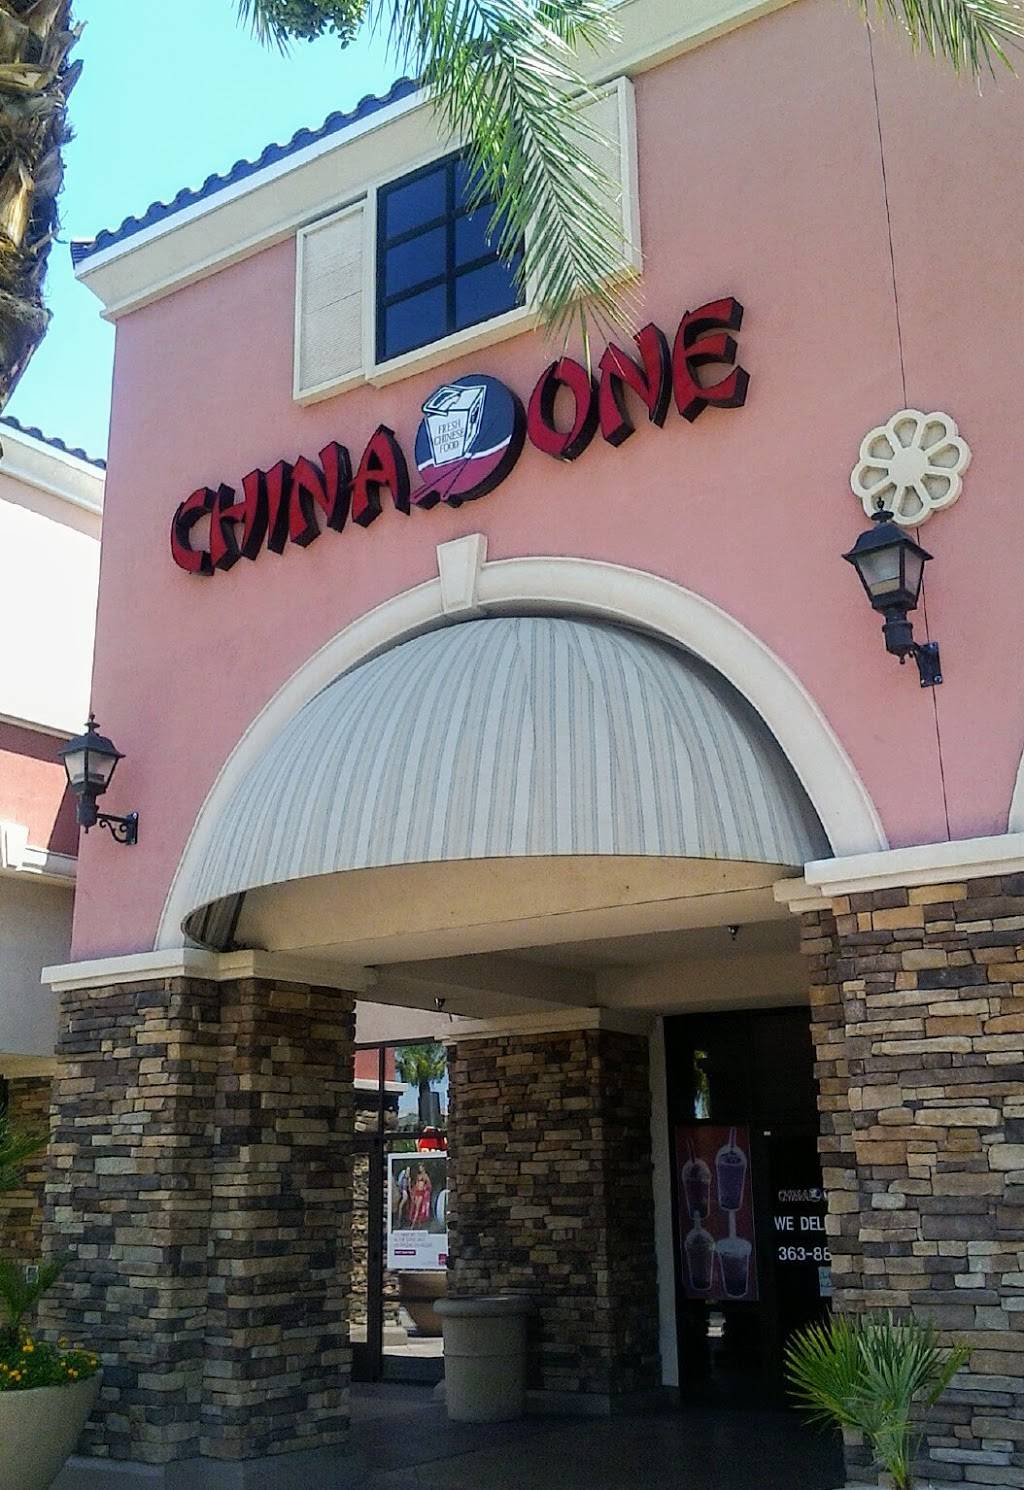 China One - N Durango | meal delivery | 7080 N Durango Dr #130, Las Vegas, NV 89149, USA | 7023638855 OR +1 702-363-8855